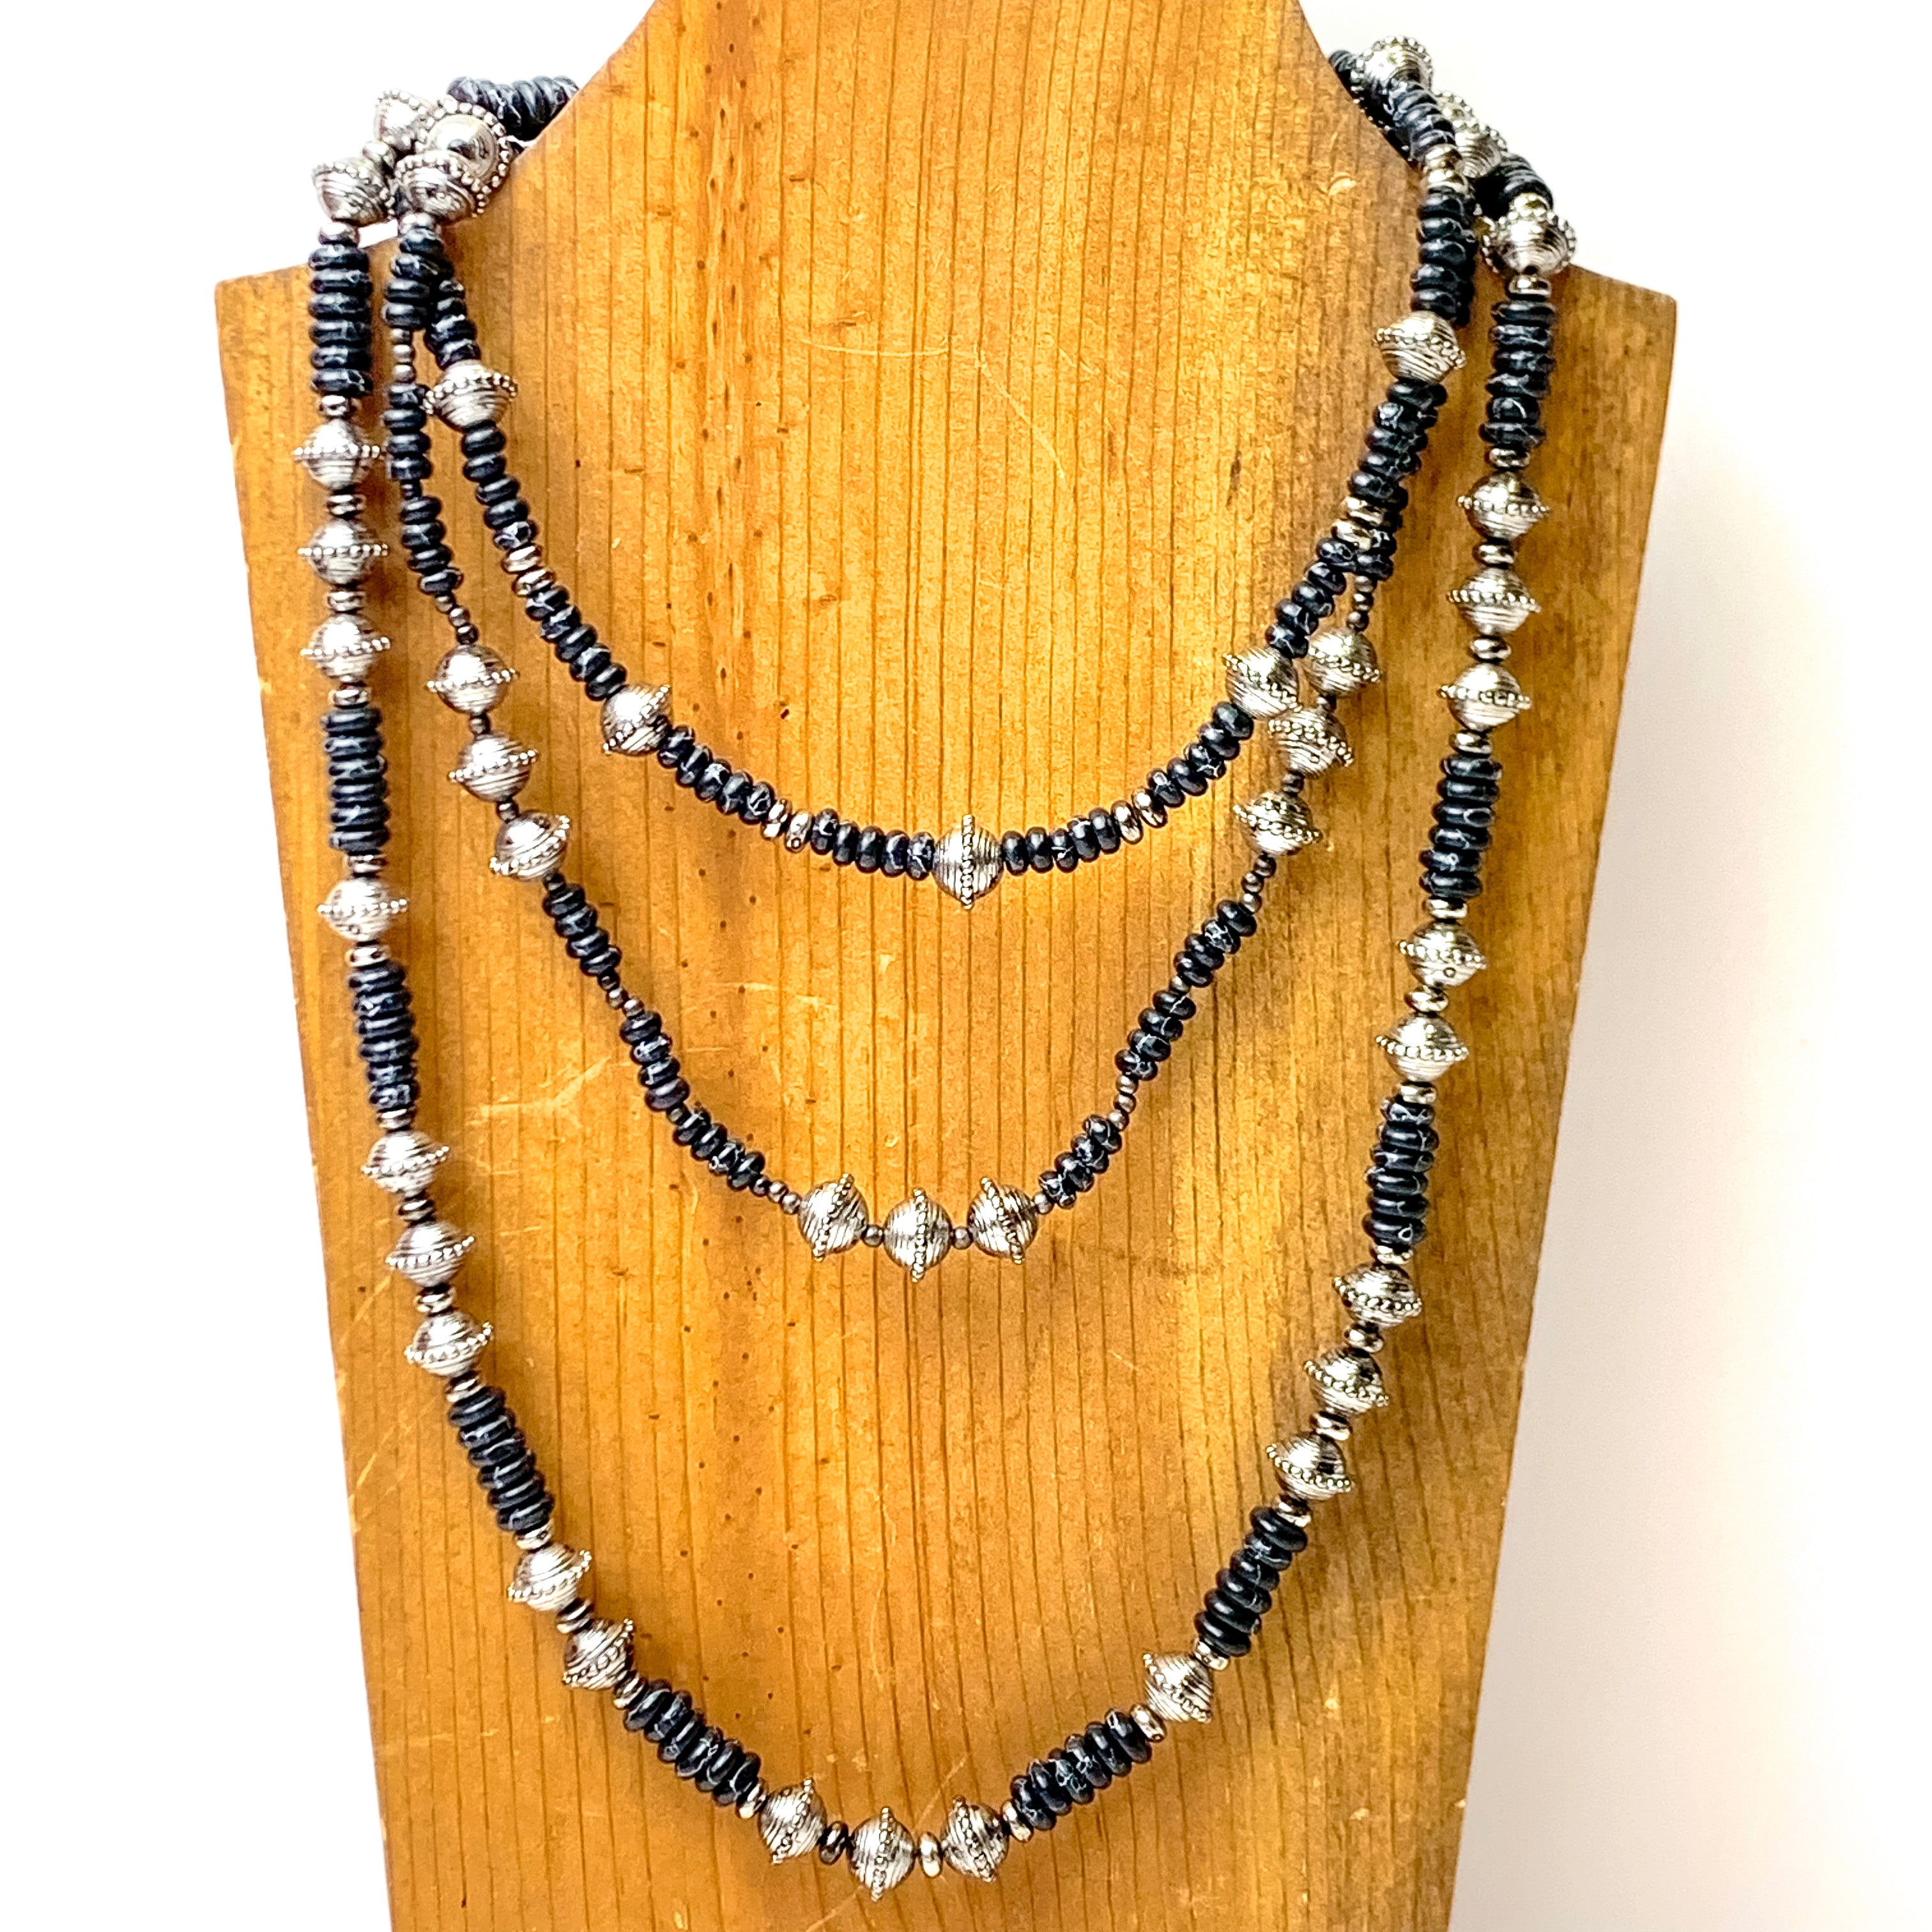 Three Strand Faux Navajo Pearl Necklace with Textured Saucer Beads in Black - Giddy Up Glamour Boutique